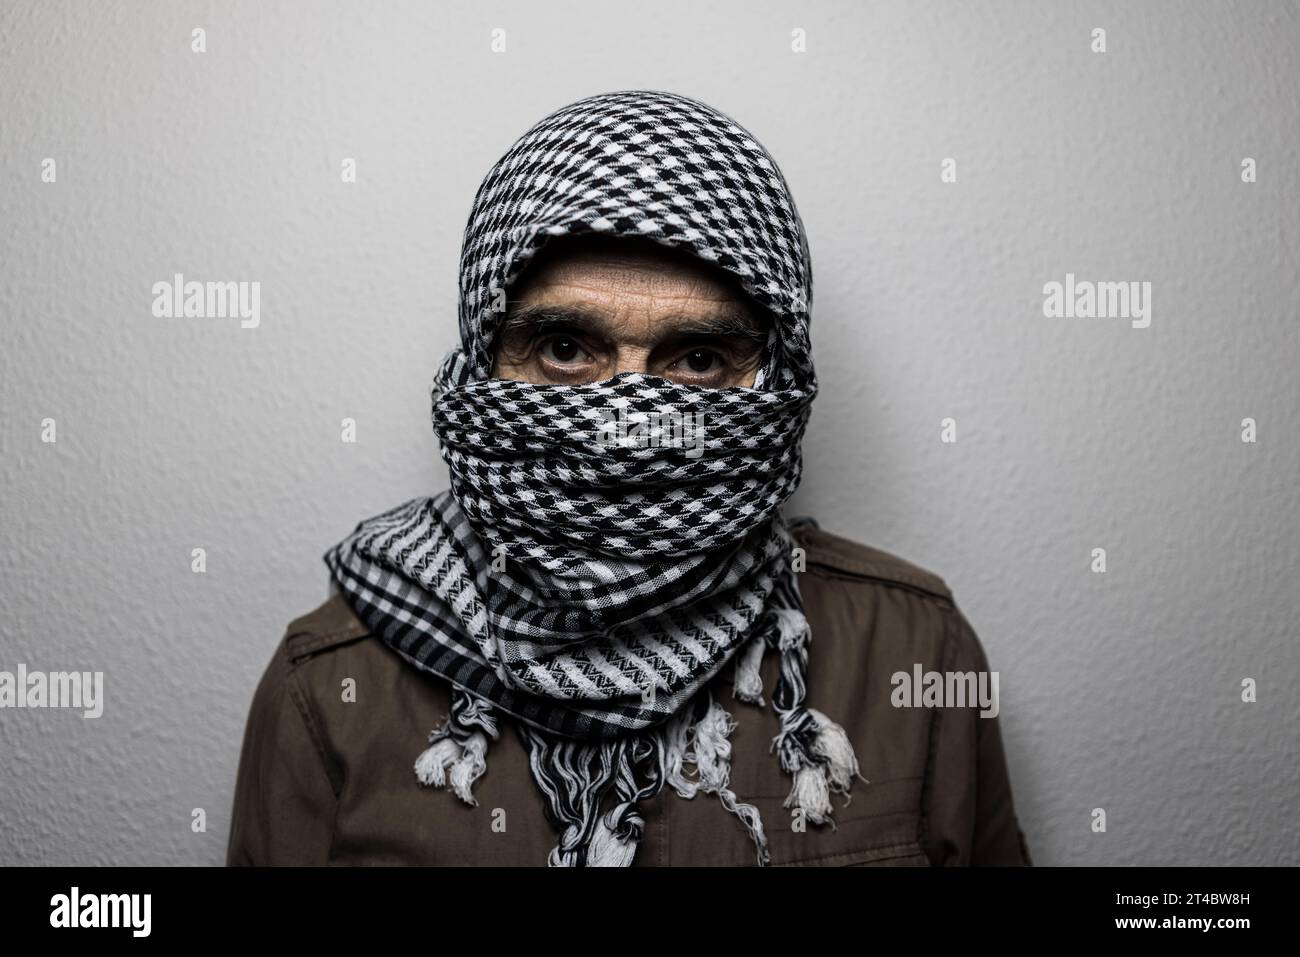 Portrait of military man wearing Palestinian headscarf or shemagh ...